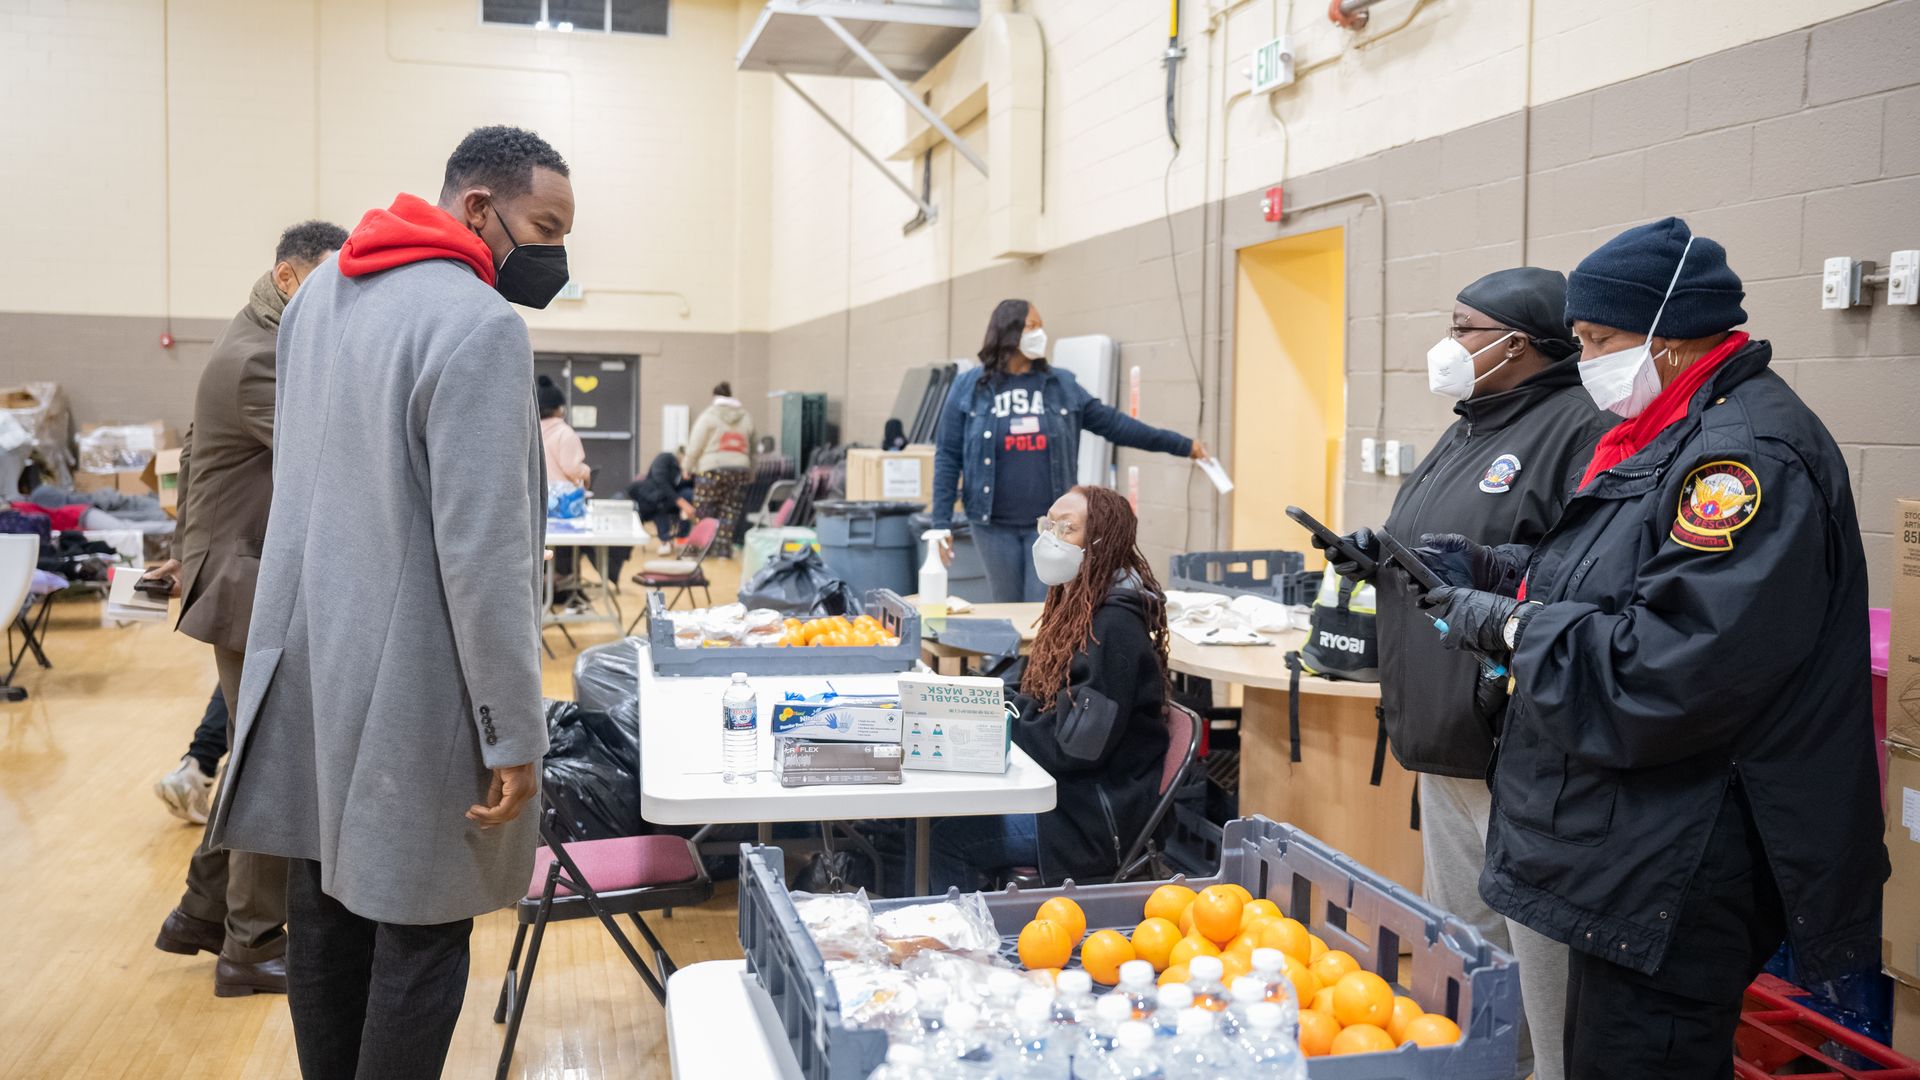 Mayor Andre Dickens looks at a table covered with oranges and bottles of water at a warming center for unsheltered people